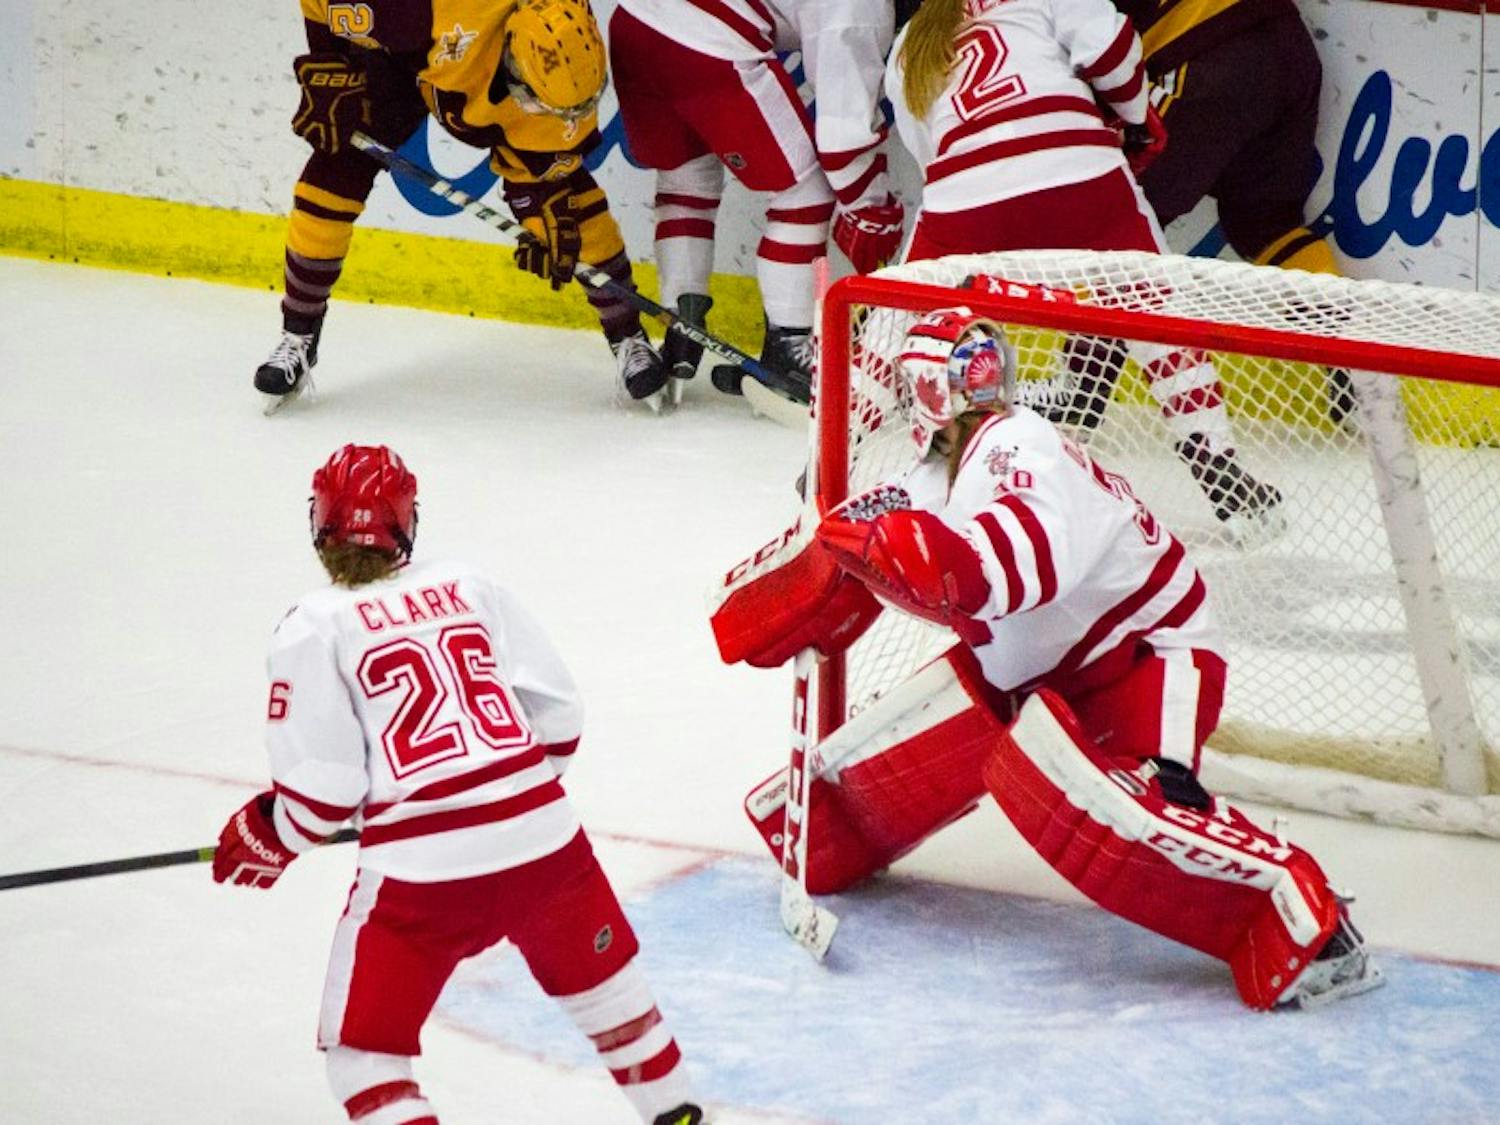 Ann-Renée Desbiens recorded her 50th career shutout, an NCAA record, as the Badgers dusted Minnesota-Duluth 8-0 Sunday.